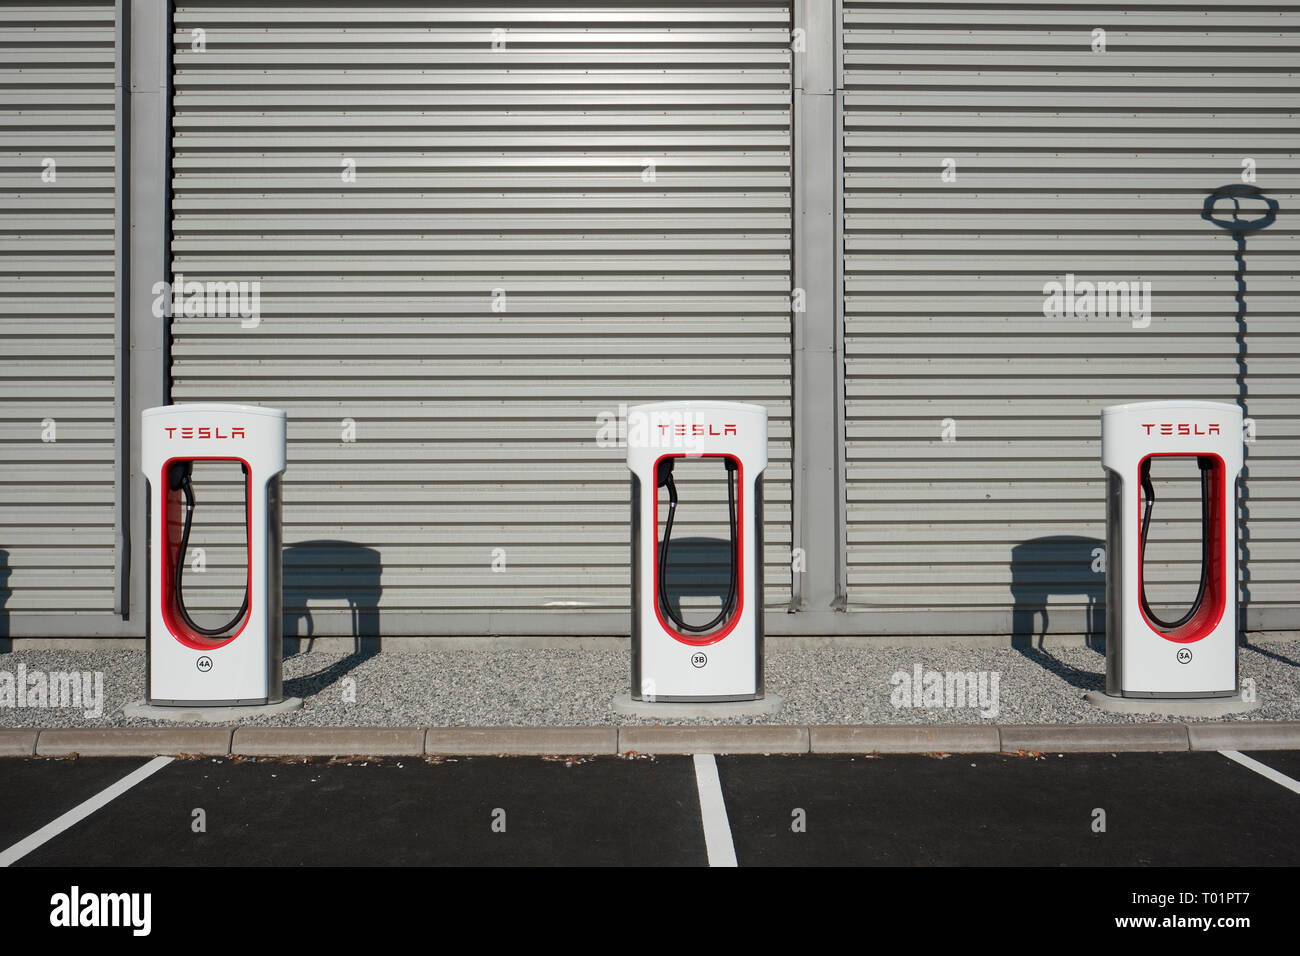 Telsa electric vehicle charging points Stock Photo